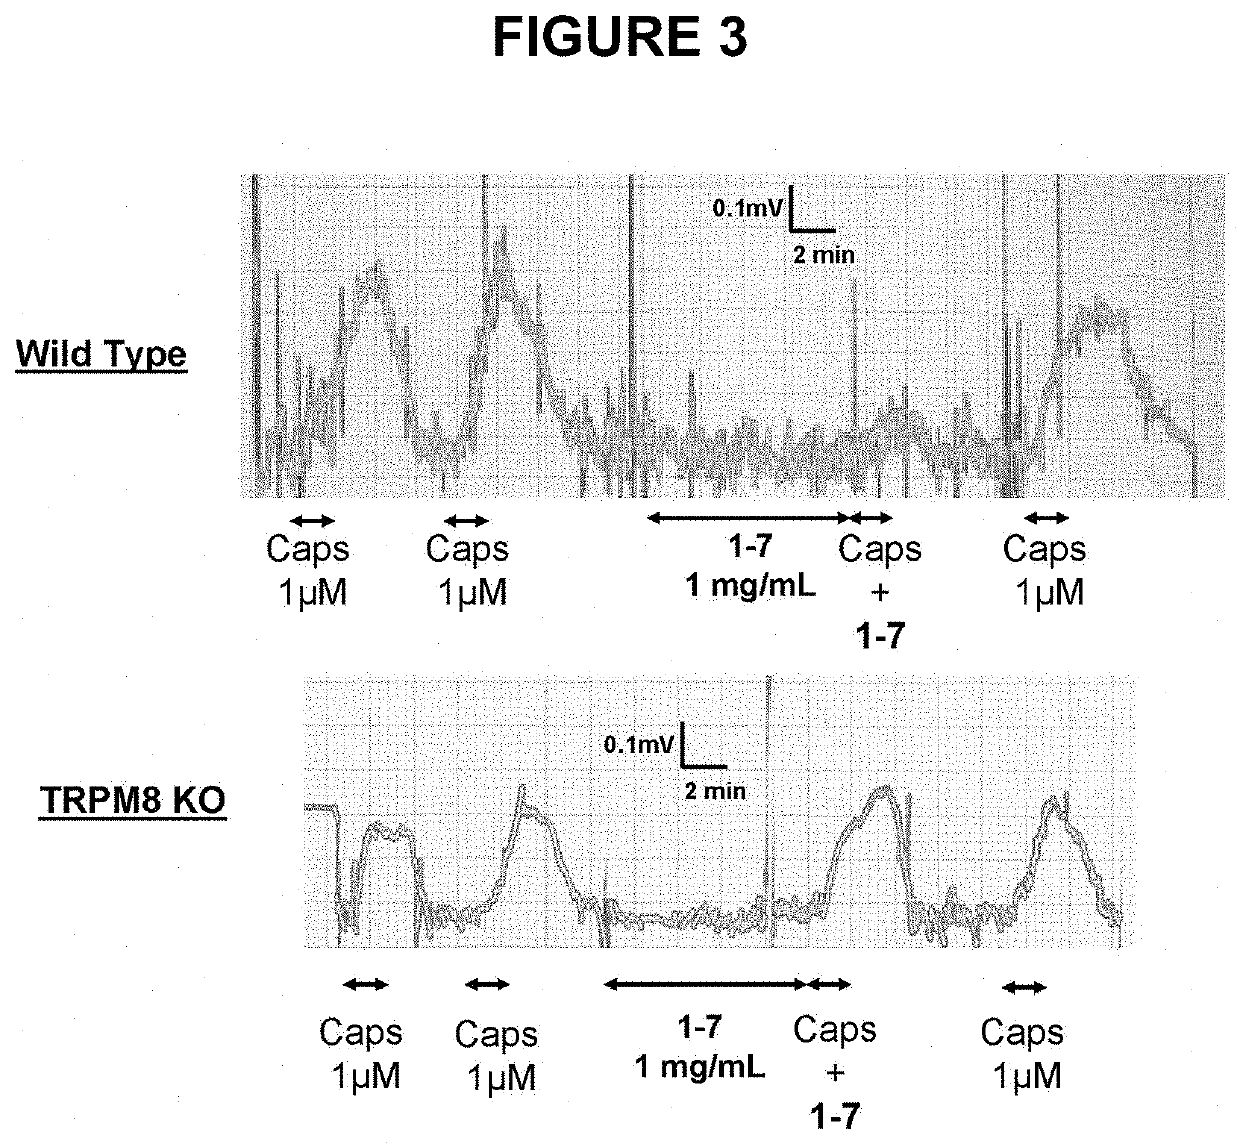 Di-isopropyl-phosphinoyl-alkanes (DAPA) compounds as topical agents for the treatment of sensory discomfort